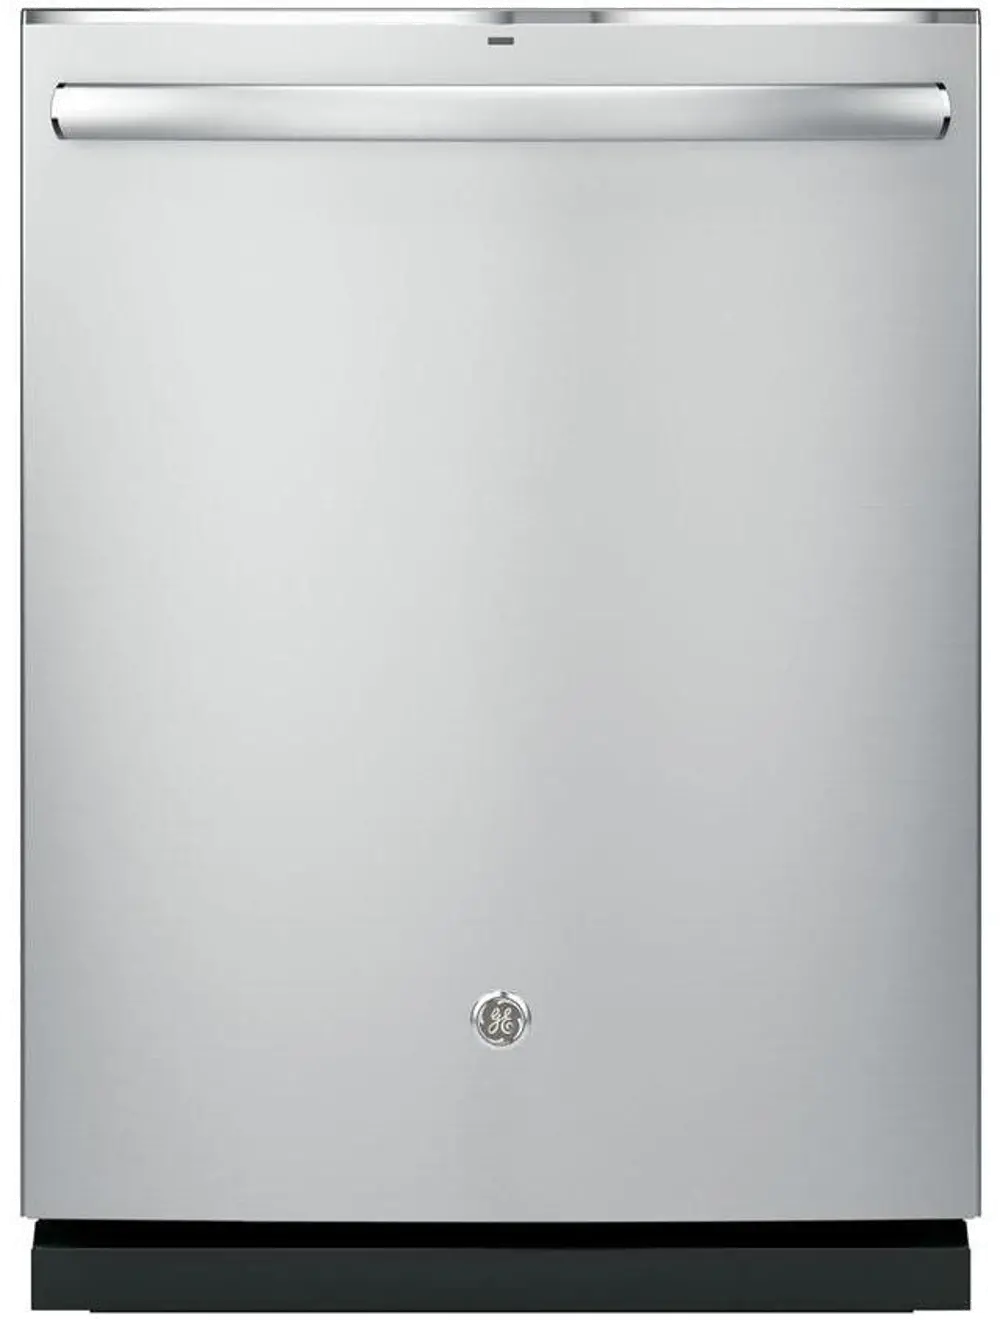 GDT655SSJSS GE Dishwasher with Wash Zones - Stainless Steel-1